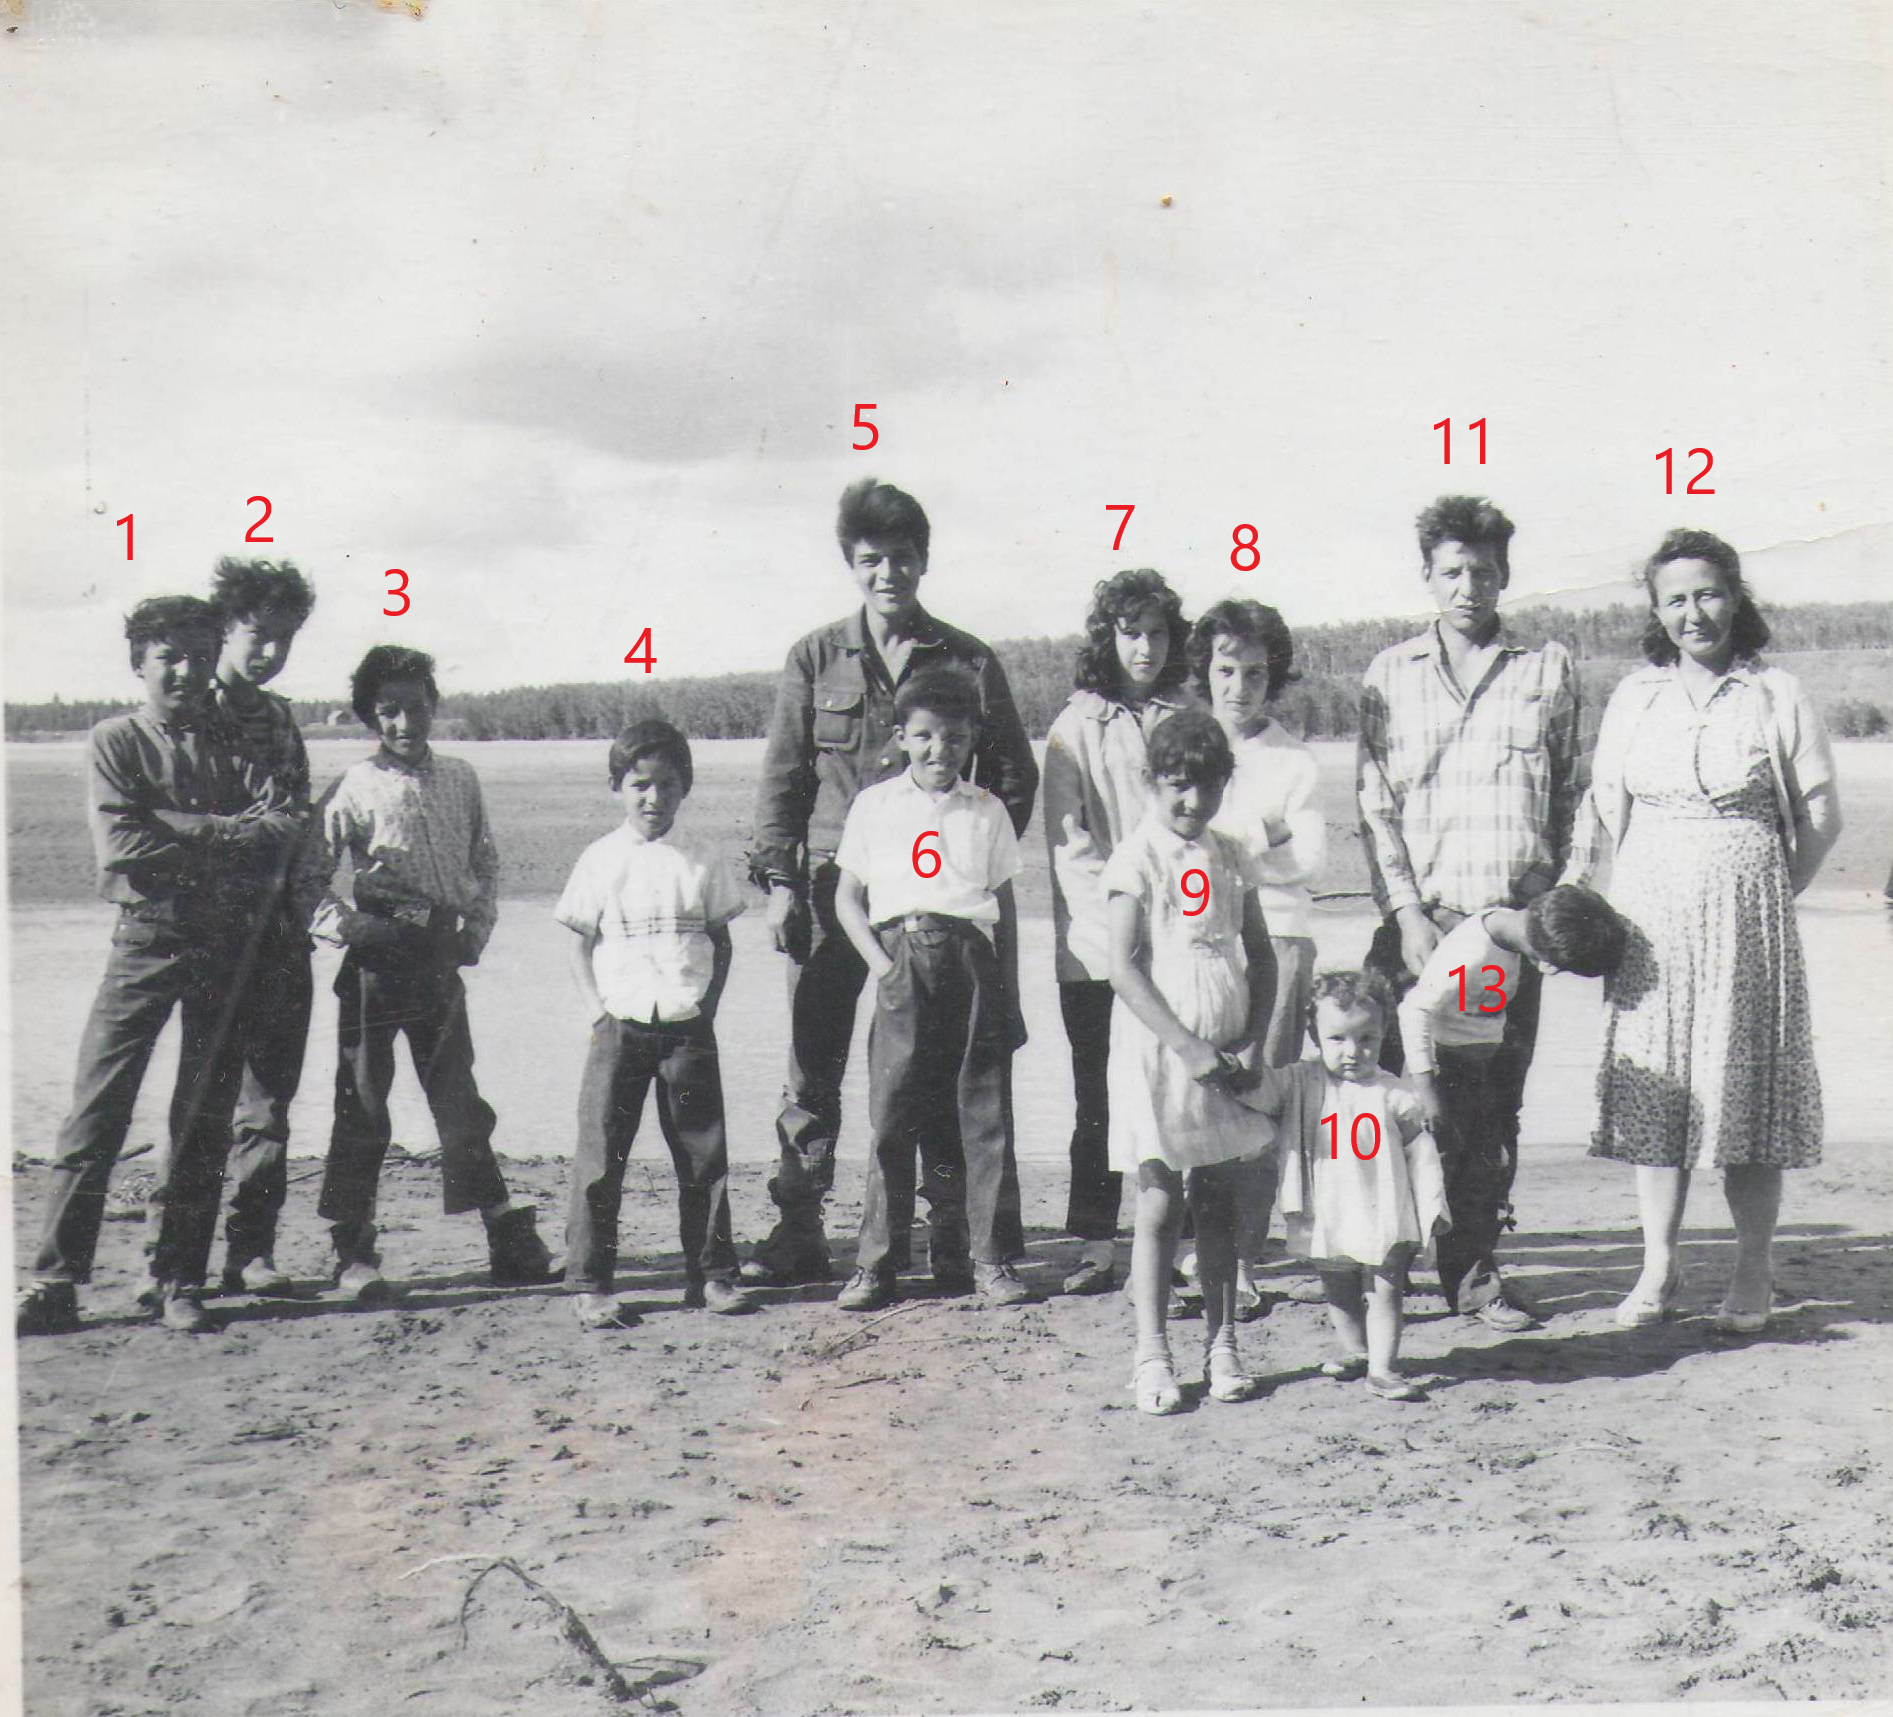 This photo is labelled as "Cousins Laure Clarke Christians family at Carcajou". Which is great start in determining who is who - but we still need your help to that end! The second image has numbers please put the number beside the name of the people you recognize!

-EDIT-

1 Boxer 2 Jack 3 Skinny 4Neil 5Henry 6 Wally 7 patricia 8 Priscilla 9 Doris 10 Barb 11 Dad 12 mom 13 Russell
2019.24.448 / Lizotte, Maria